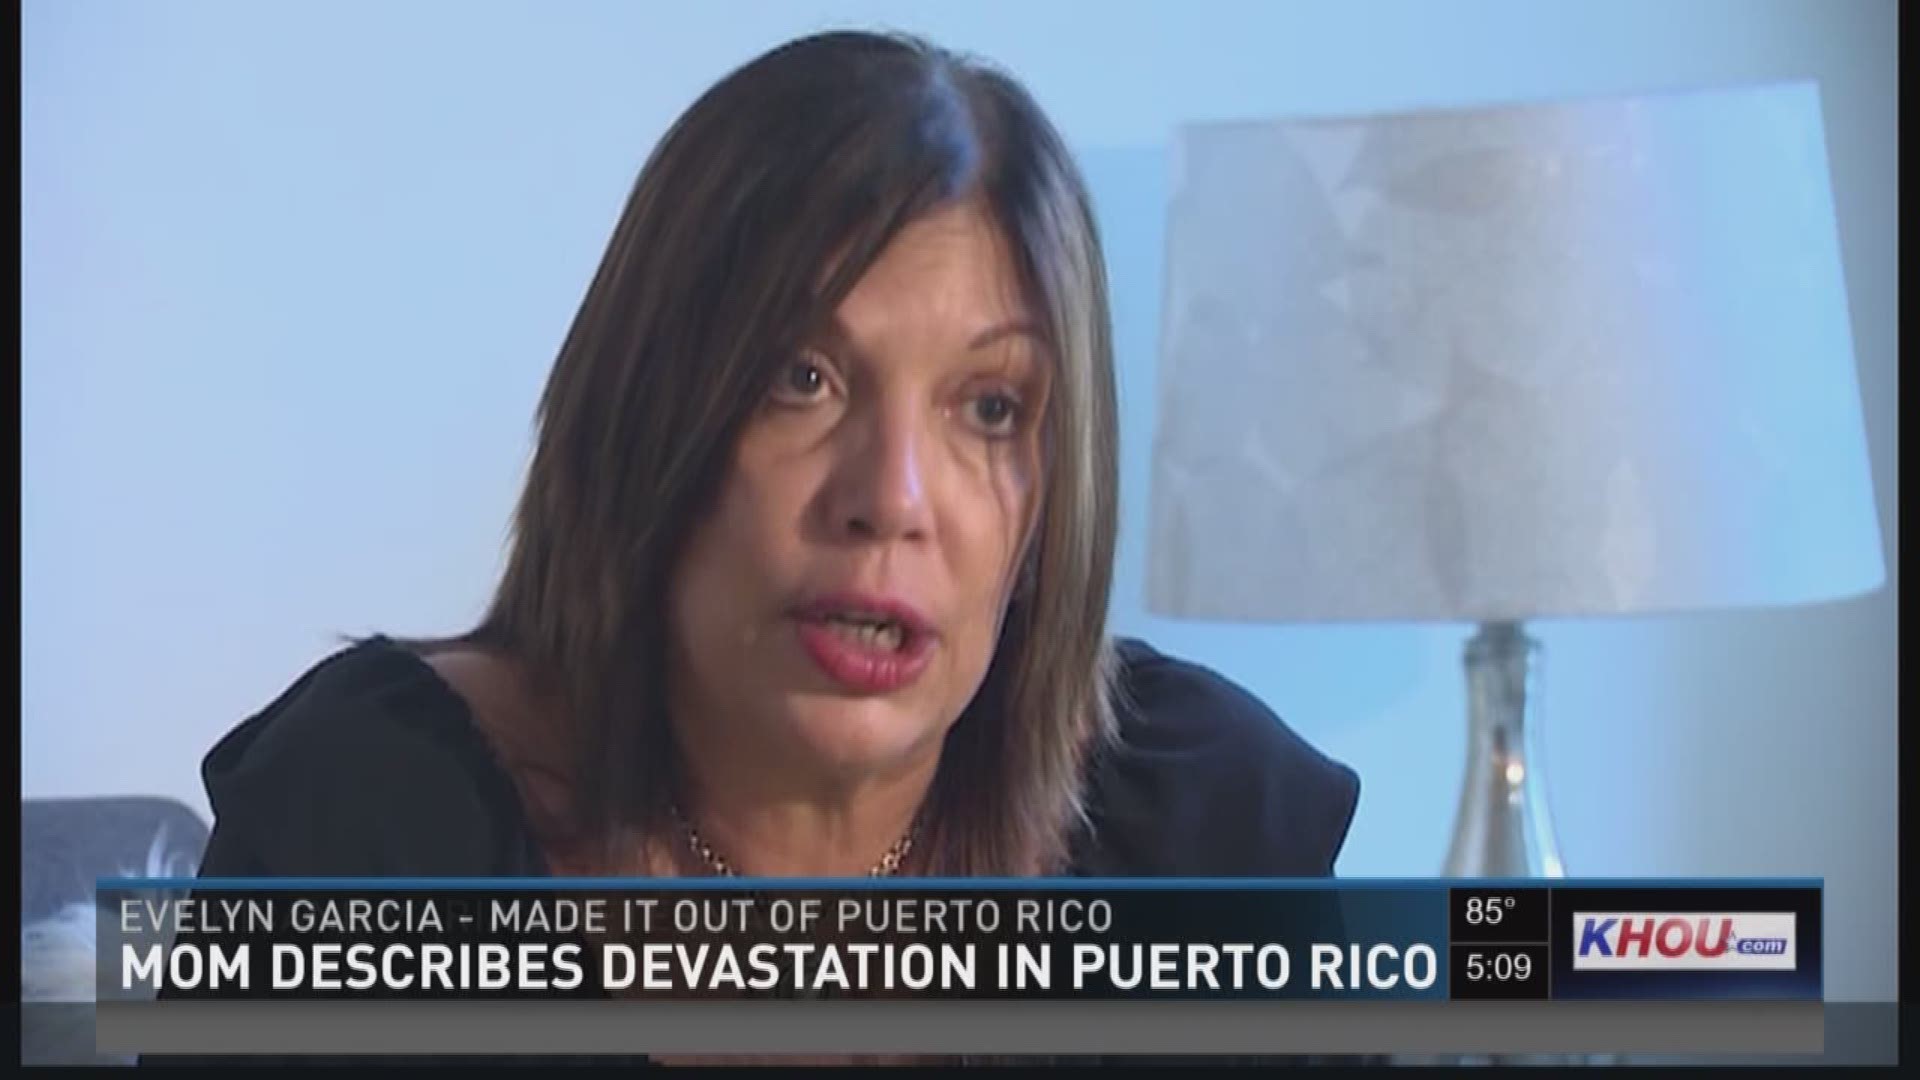 A woman from Puerto Rico was able to get to her daughter's home in Houston. She spoke with KHOU 11 News about her experience being on the island during Hurricane Maria.